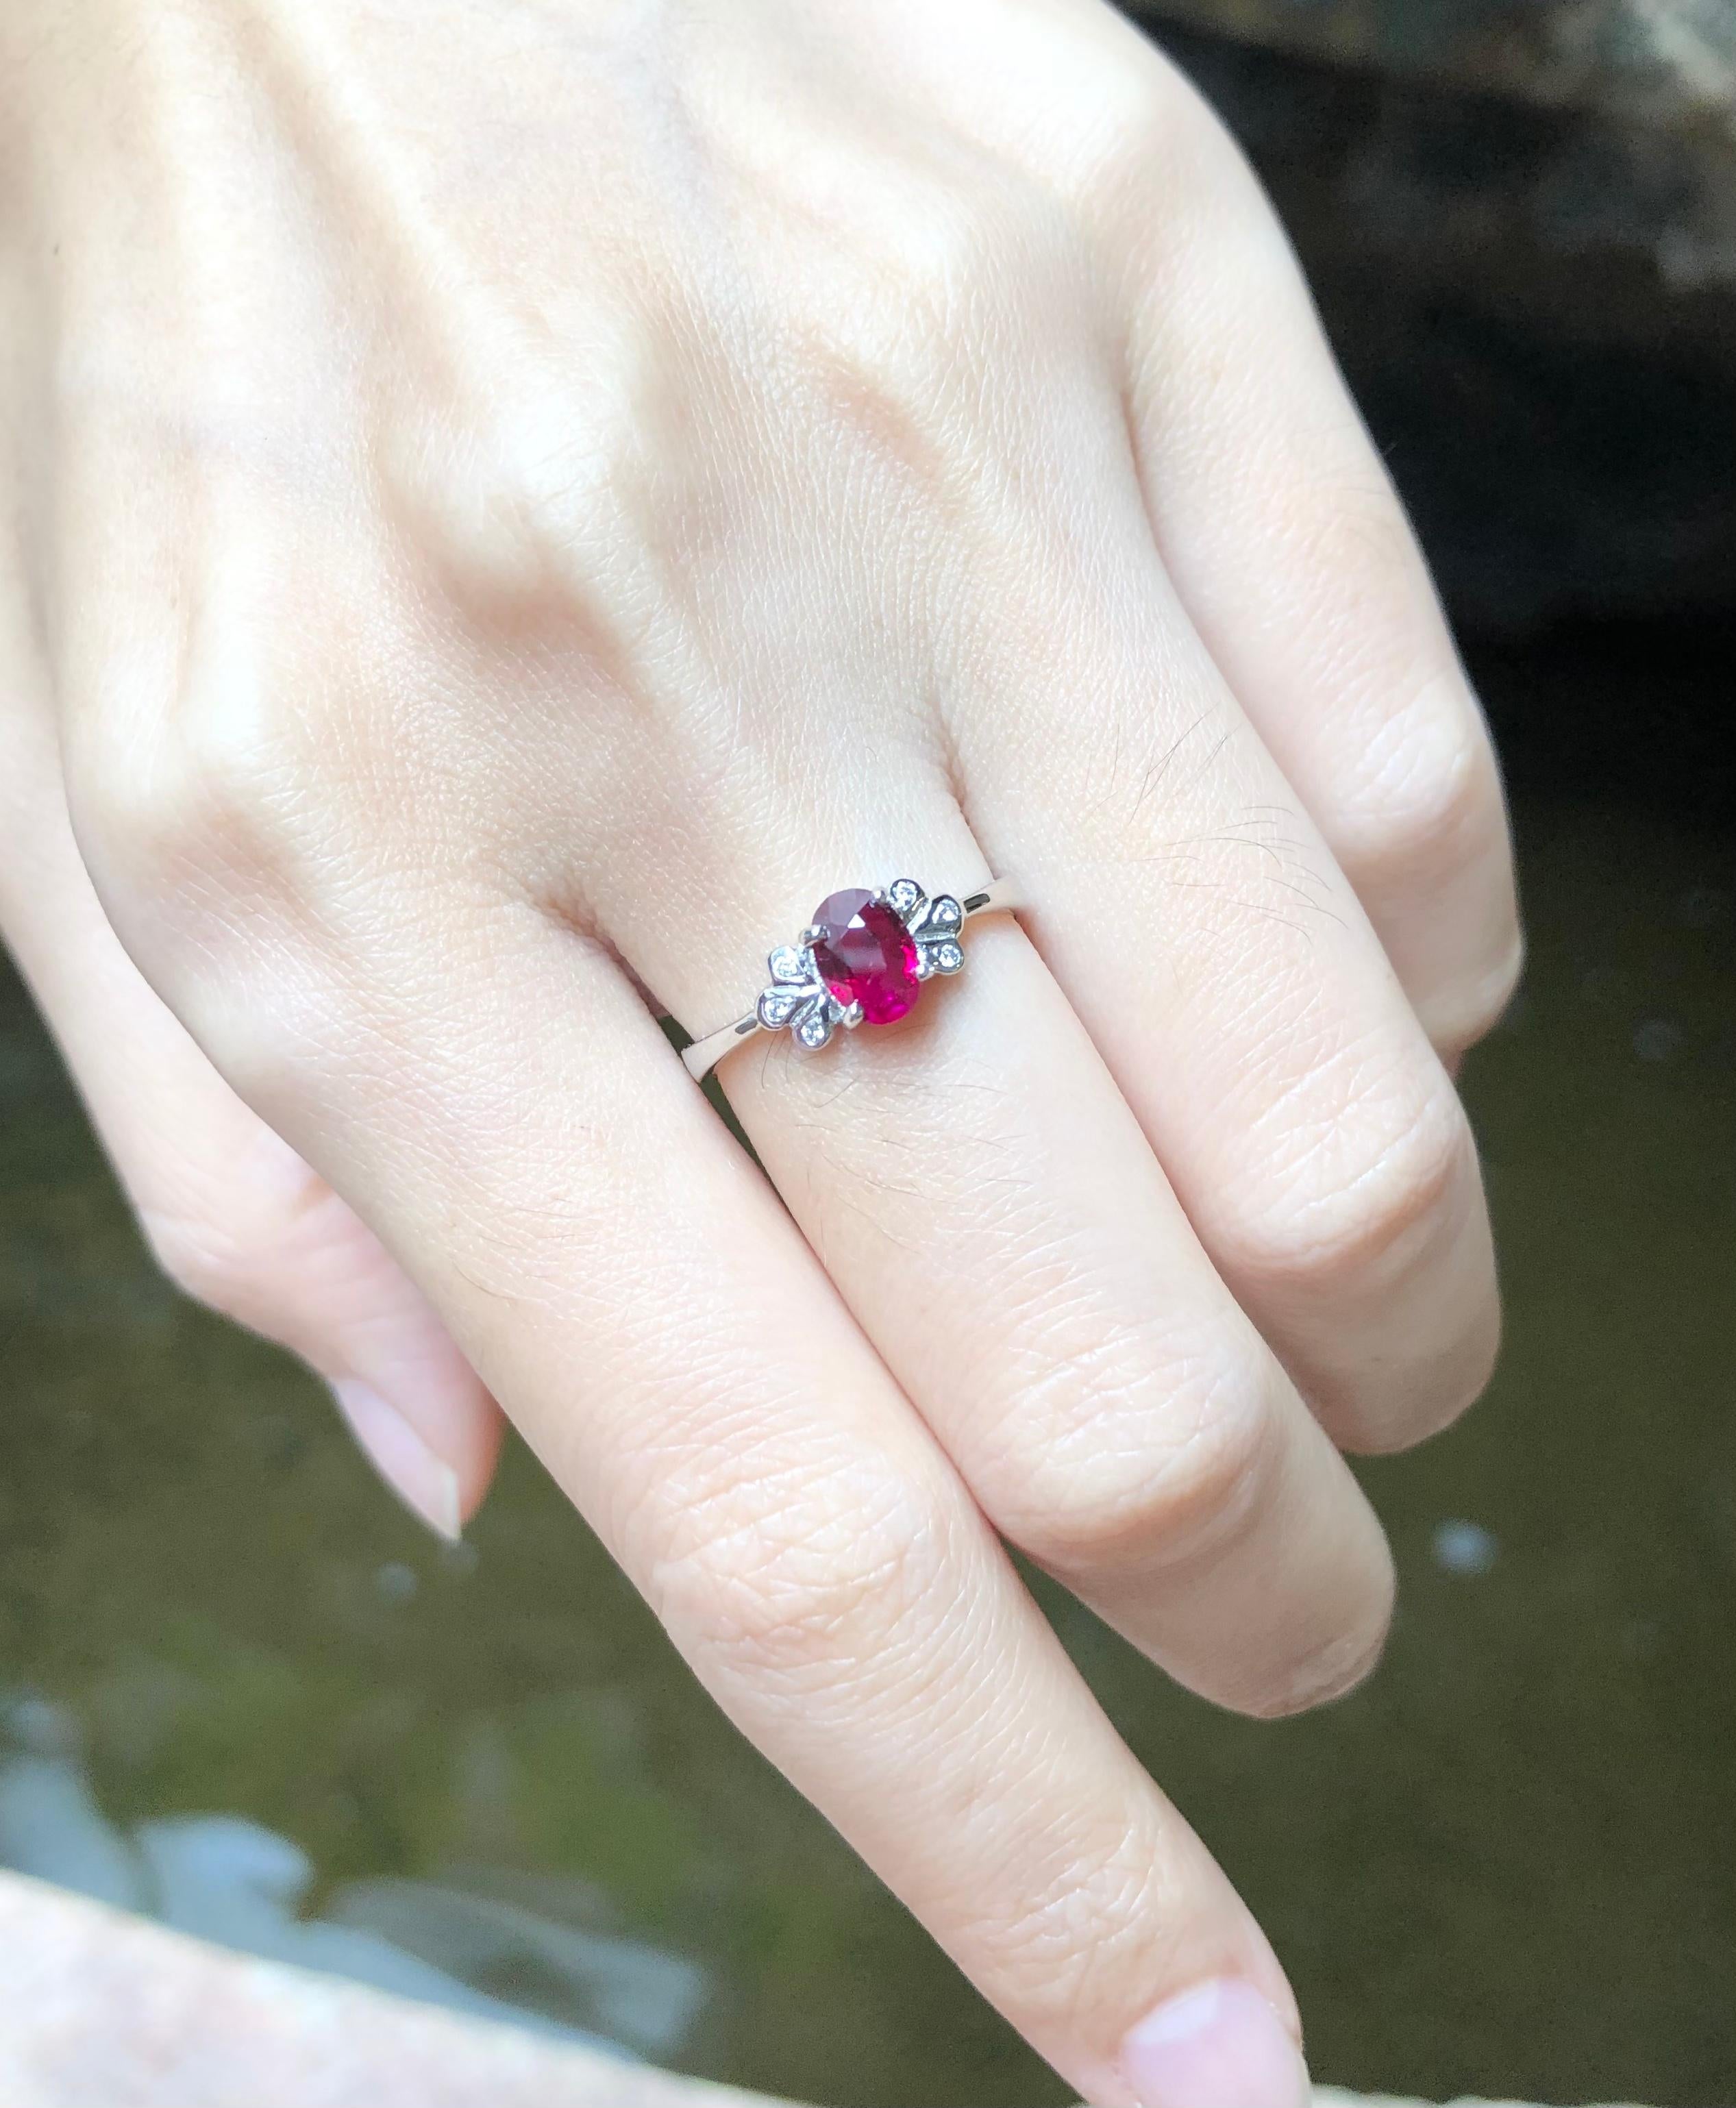 Ruby 0.71 carat with Diamond 0.03 carat Ring set in 18 Karat White Gold Settings

Width:  1.0 cm 
Length: 0.6 cm
Ring Size: 53
Total Weight: 2.36 grams

Ruby 
Width:  0.5 cm 
Length: 0.6 cm

